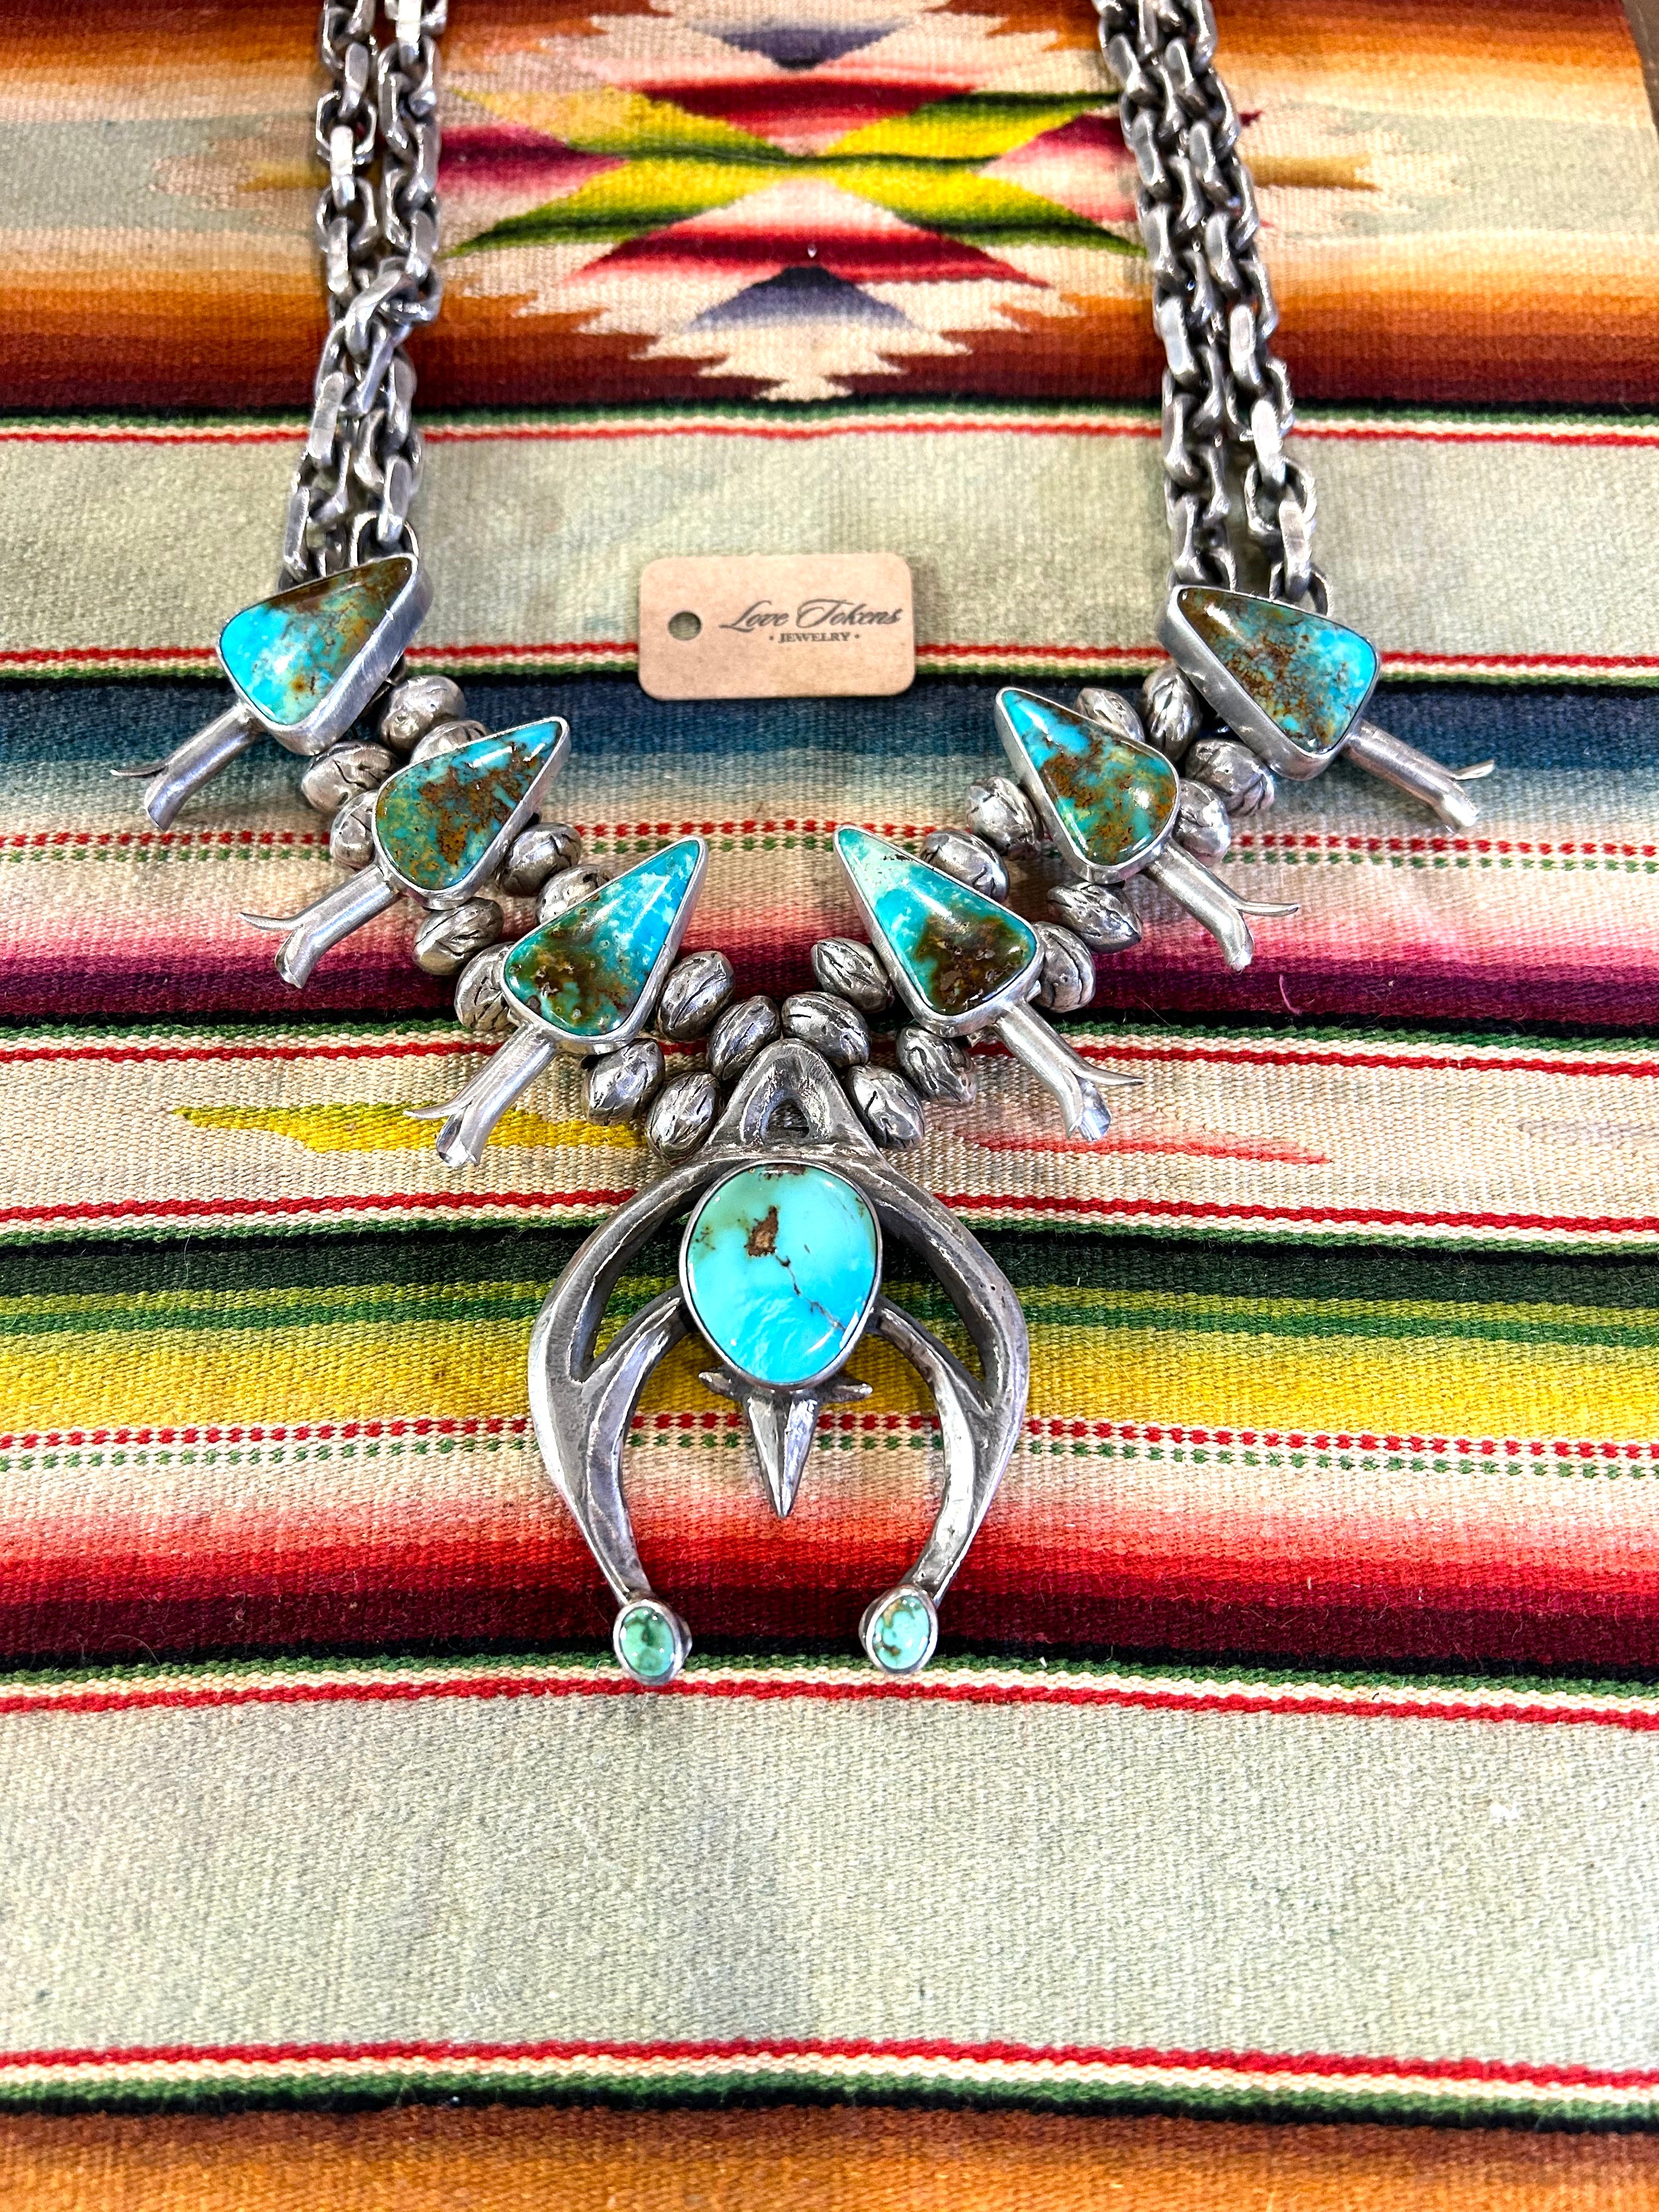 Shortening a Squash Blossom Necklace for Paula | Native American Jewelry  Tips